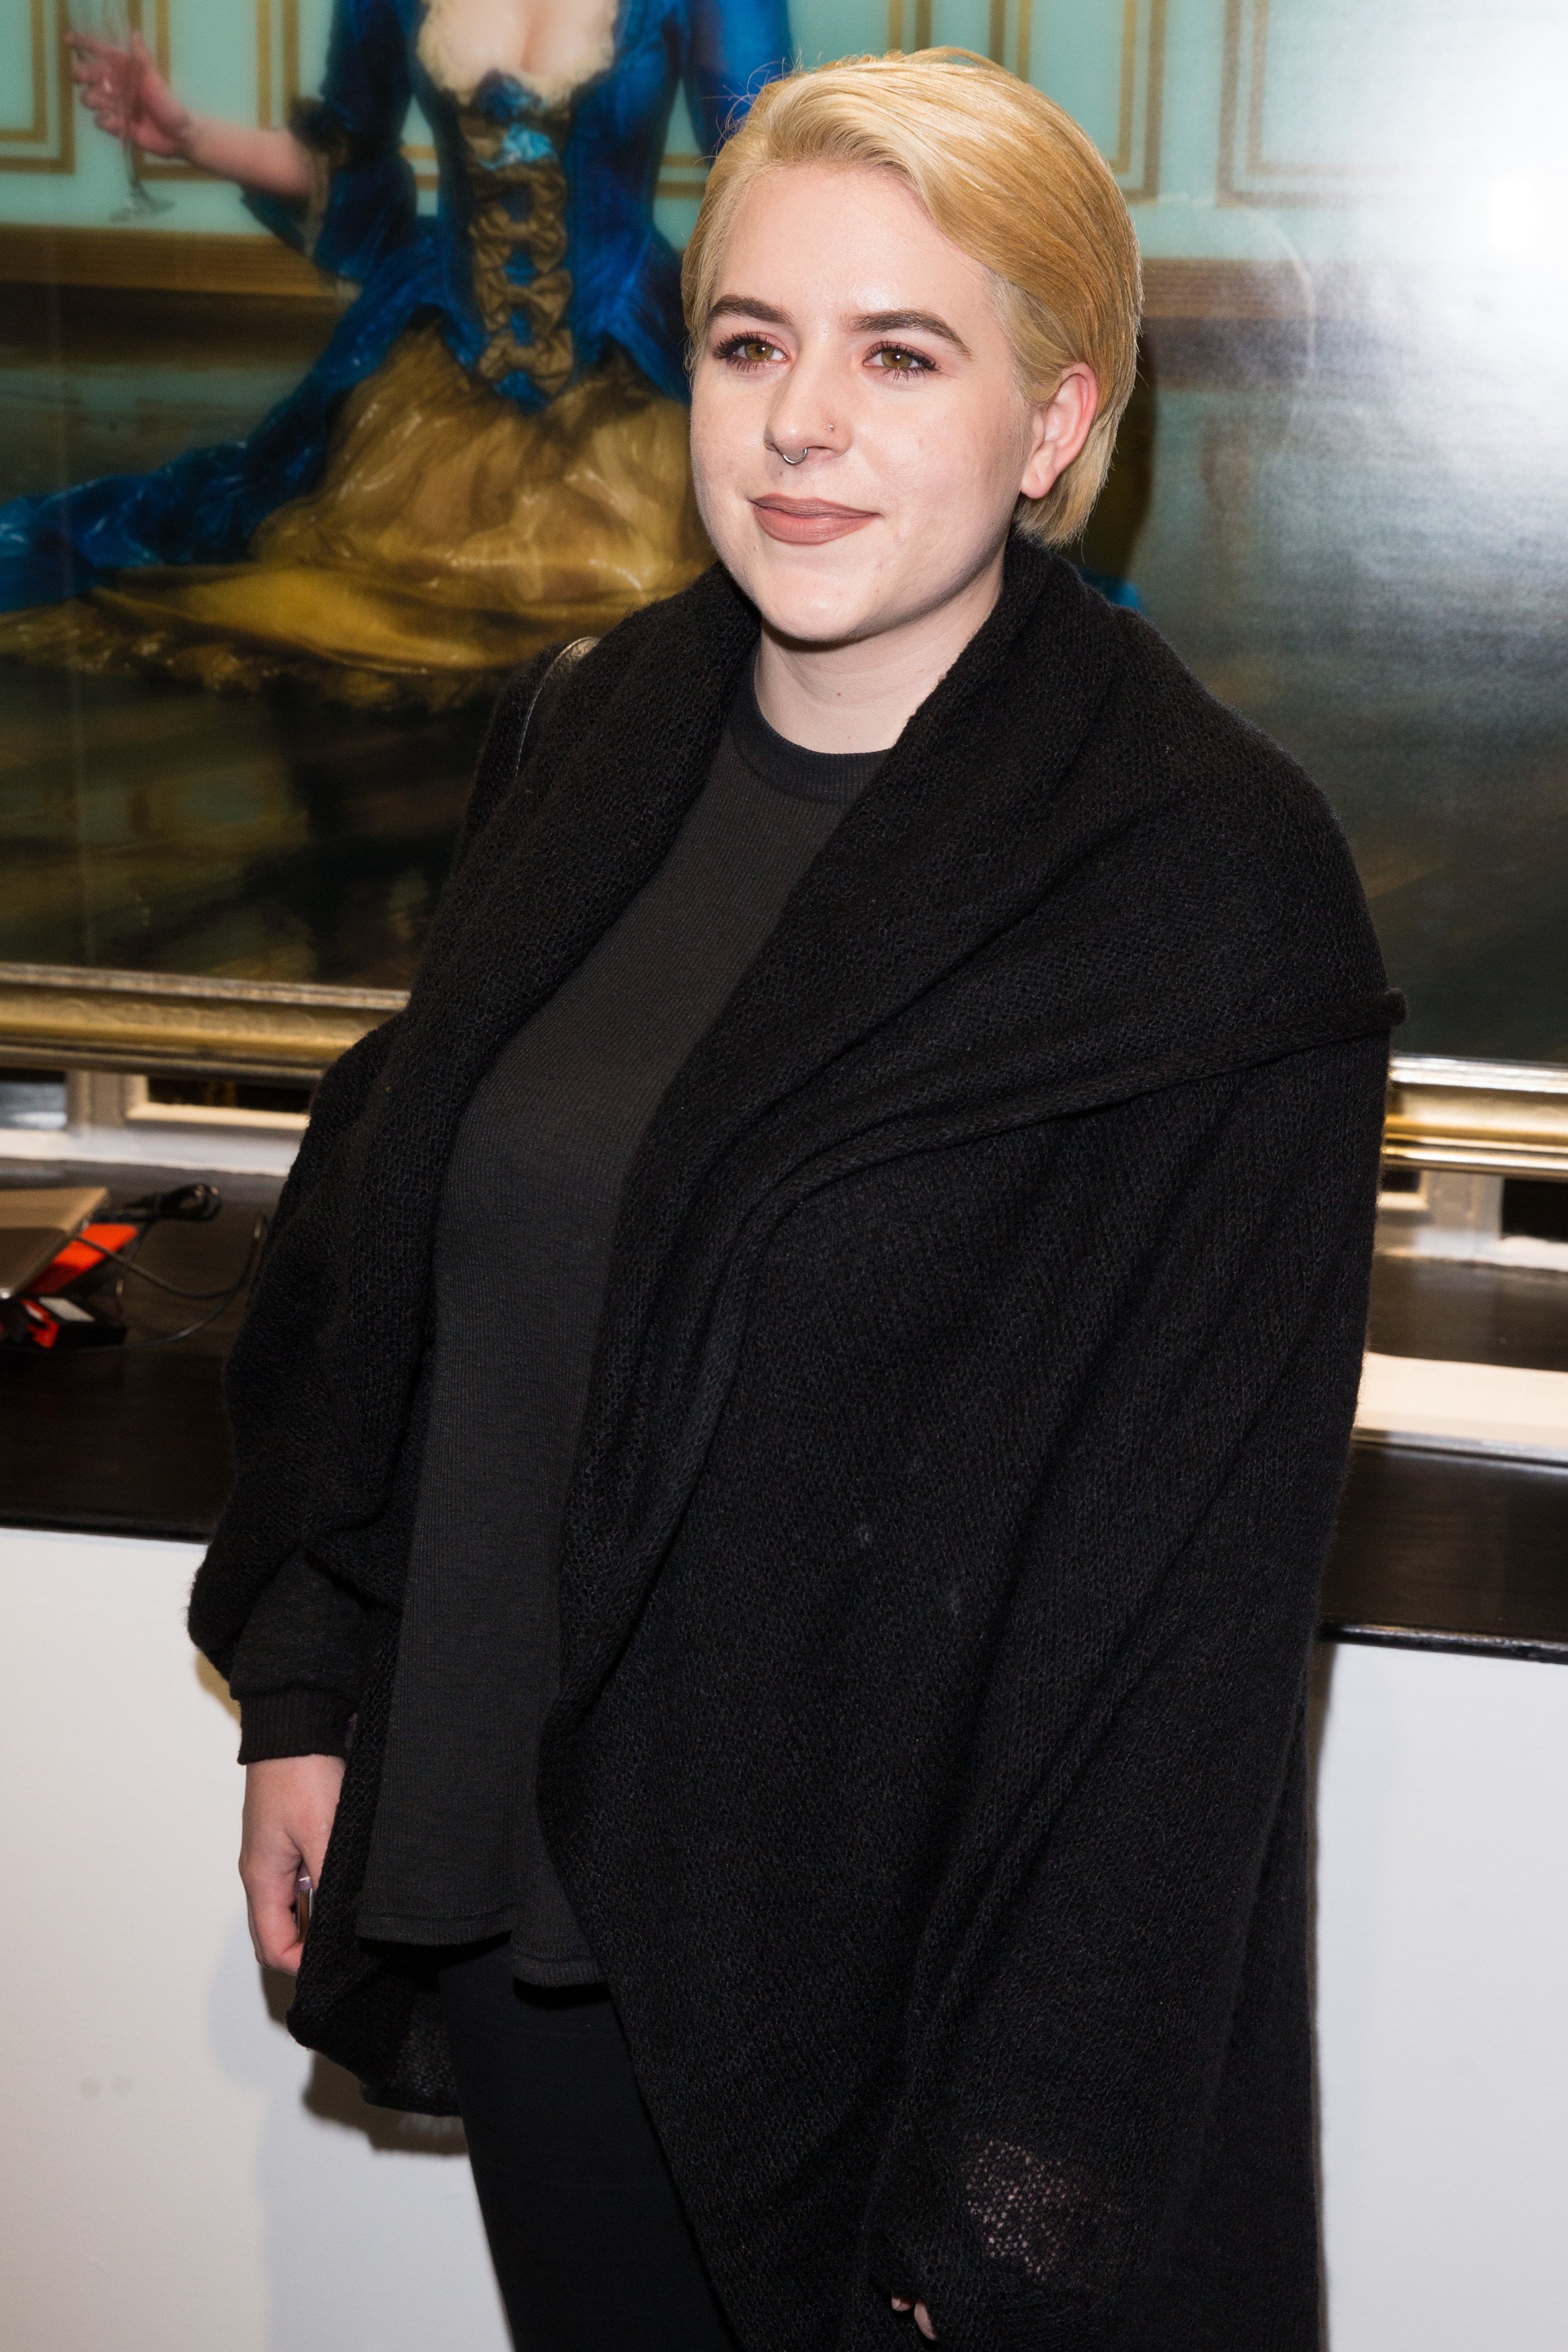  Bella Cruise attends the private view of Tyler Shields: Decadence at Maddox Gallery on February 3, 2016 in London, England | Source: Getty Images